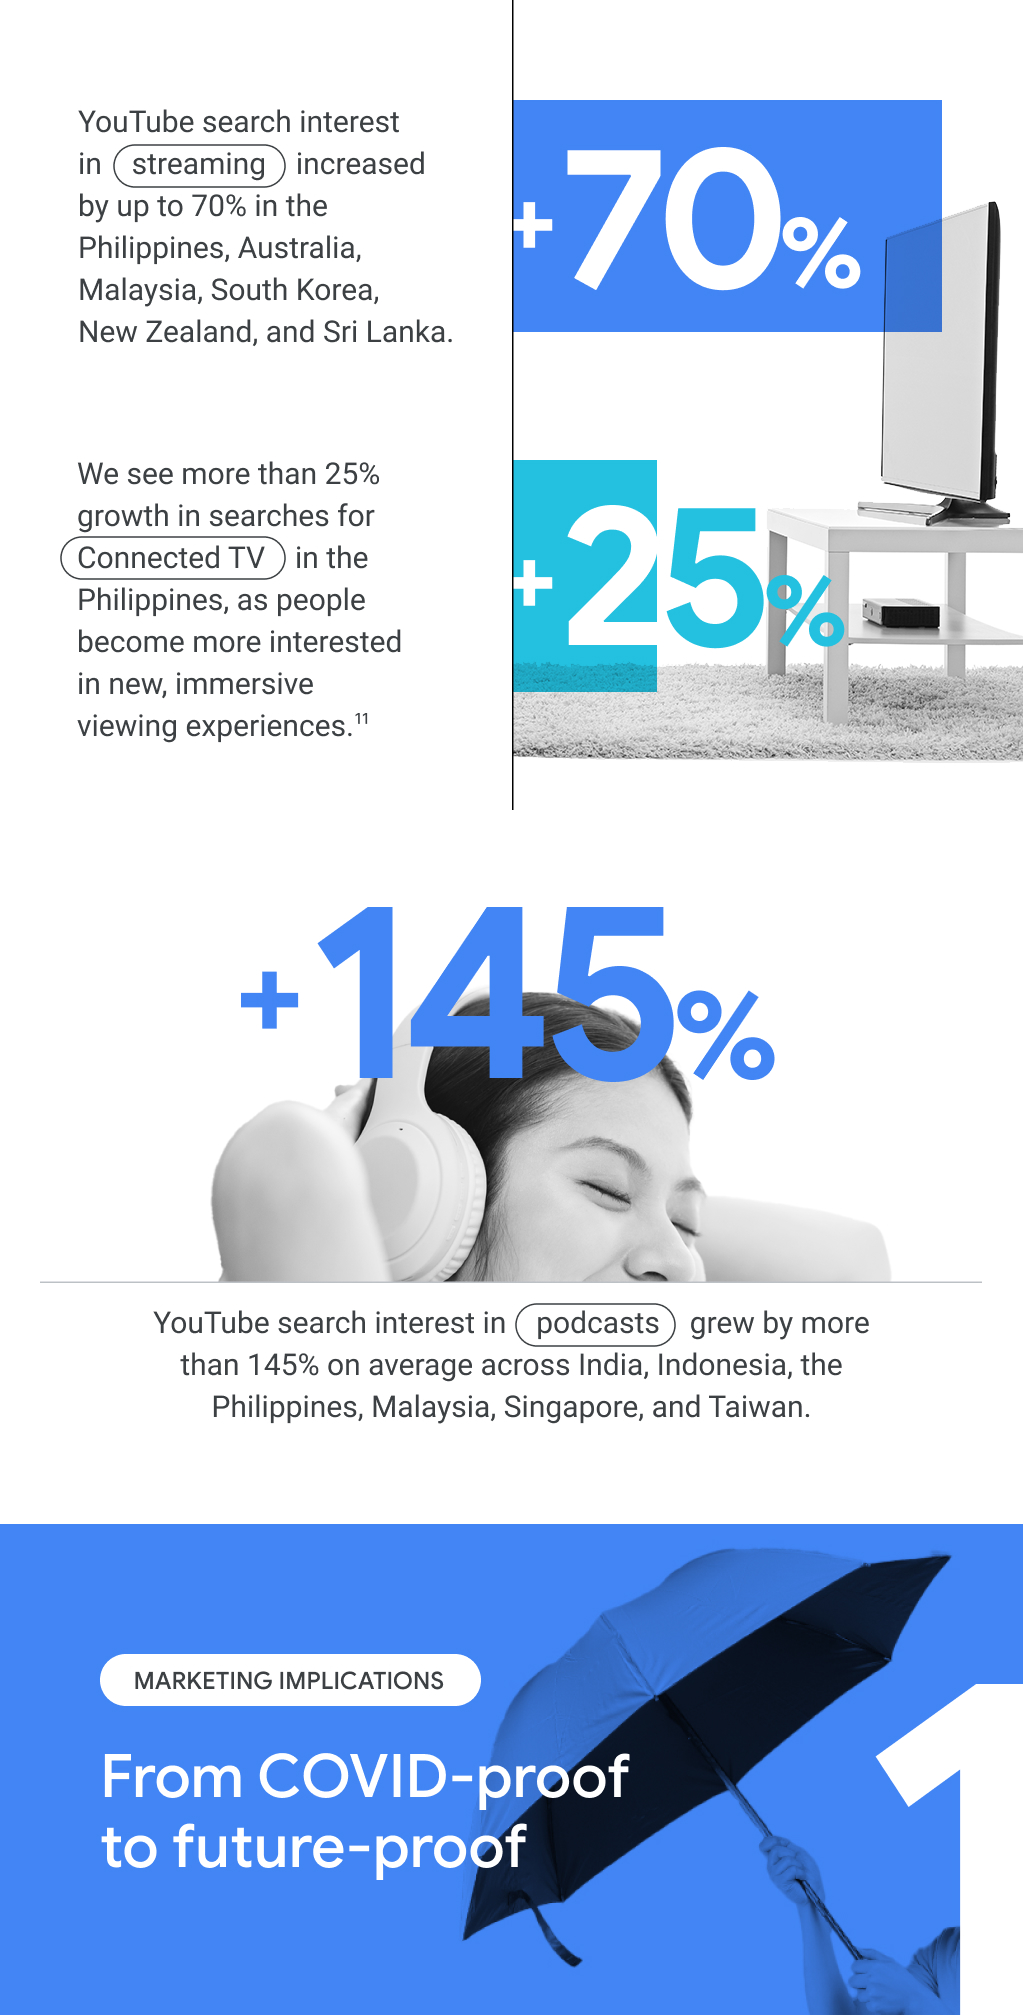 YouTube search interest in “streaming” and “podcasts” grew by up to 70% and over 140% respectively in the Philippines and other APAC countries. Over 25% growth in searches for “Connected TV”. Marketing implications: From COVID-proof to future-proof.